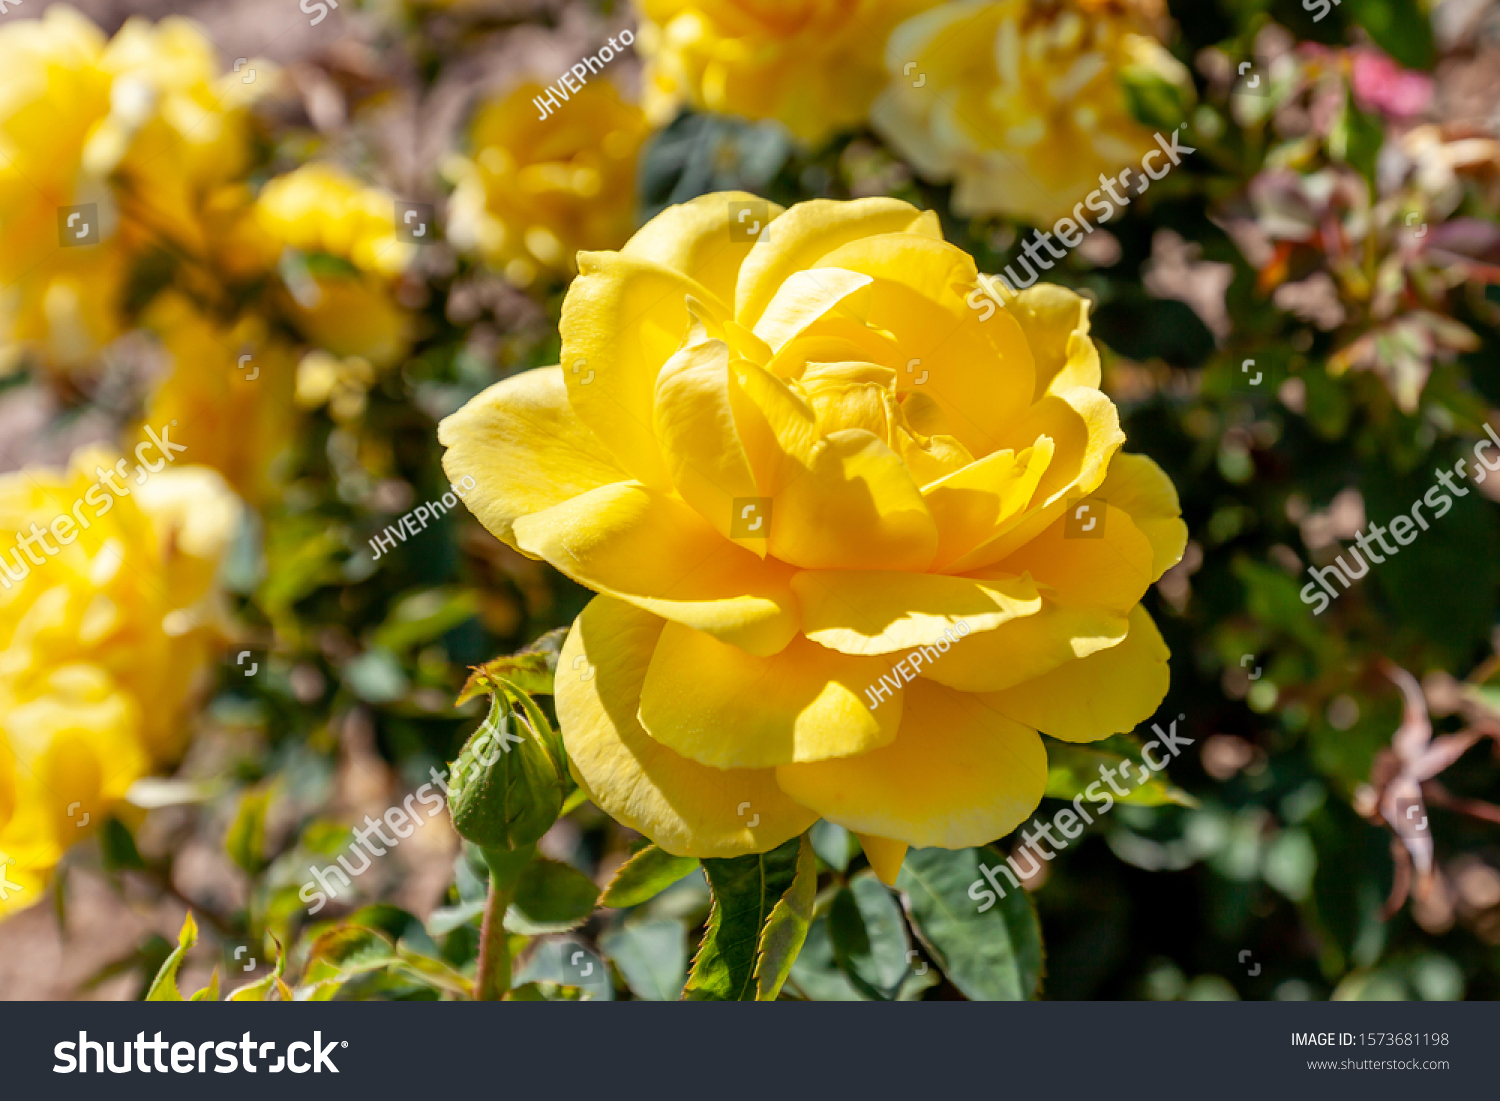 Mellow Yellow rose flower in the field. Flower bloom Color: Deep yellow. #1573681198